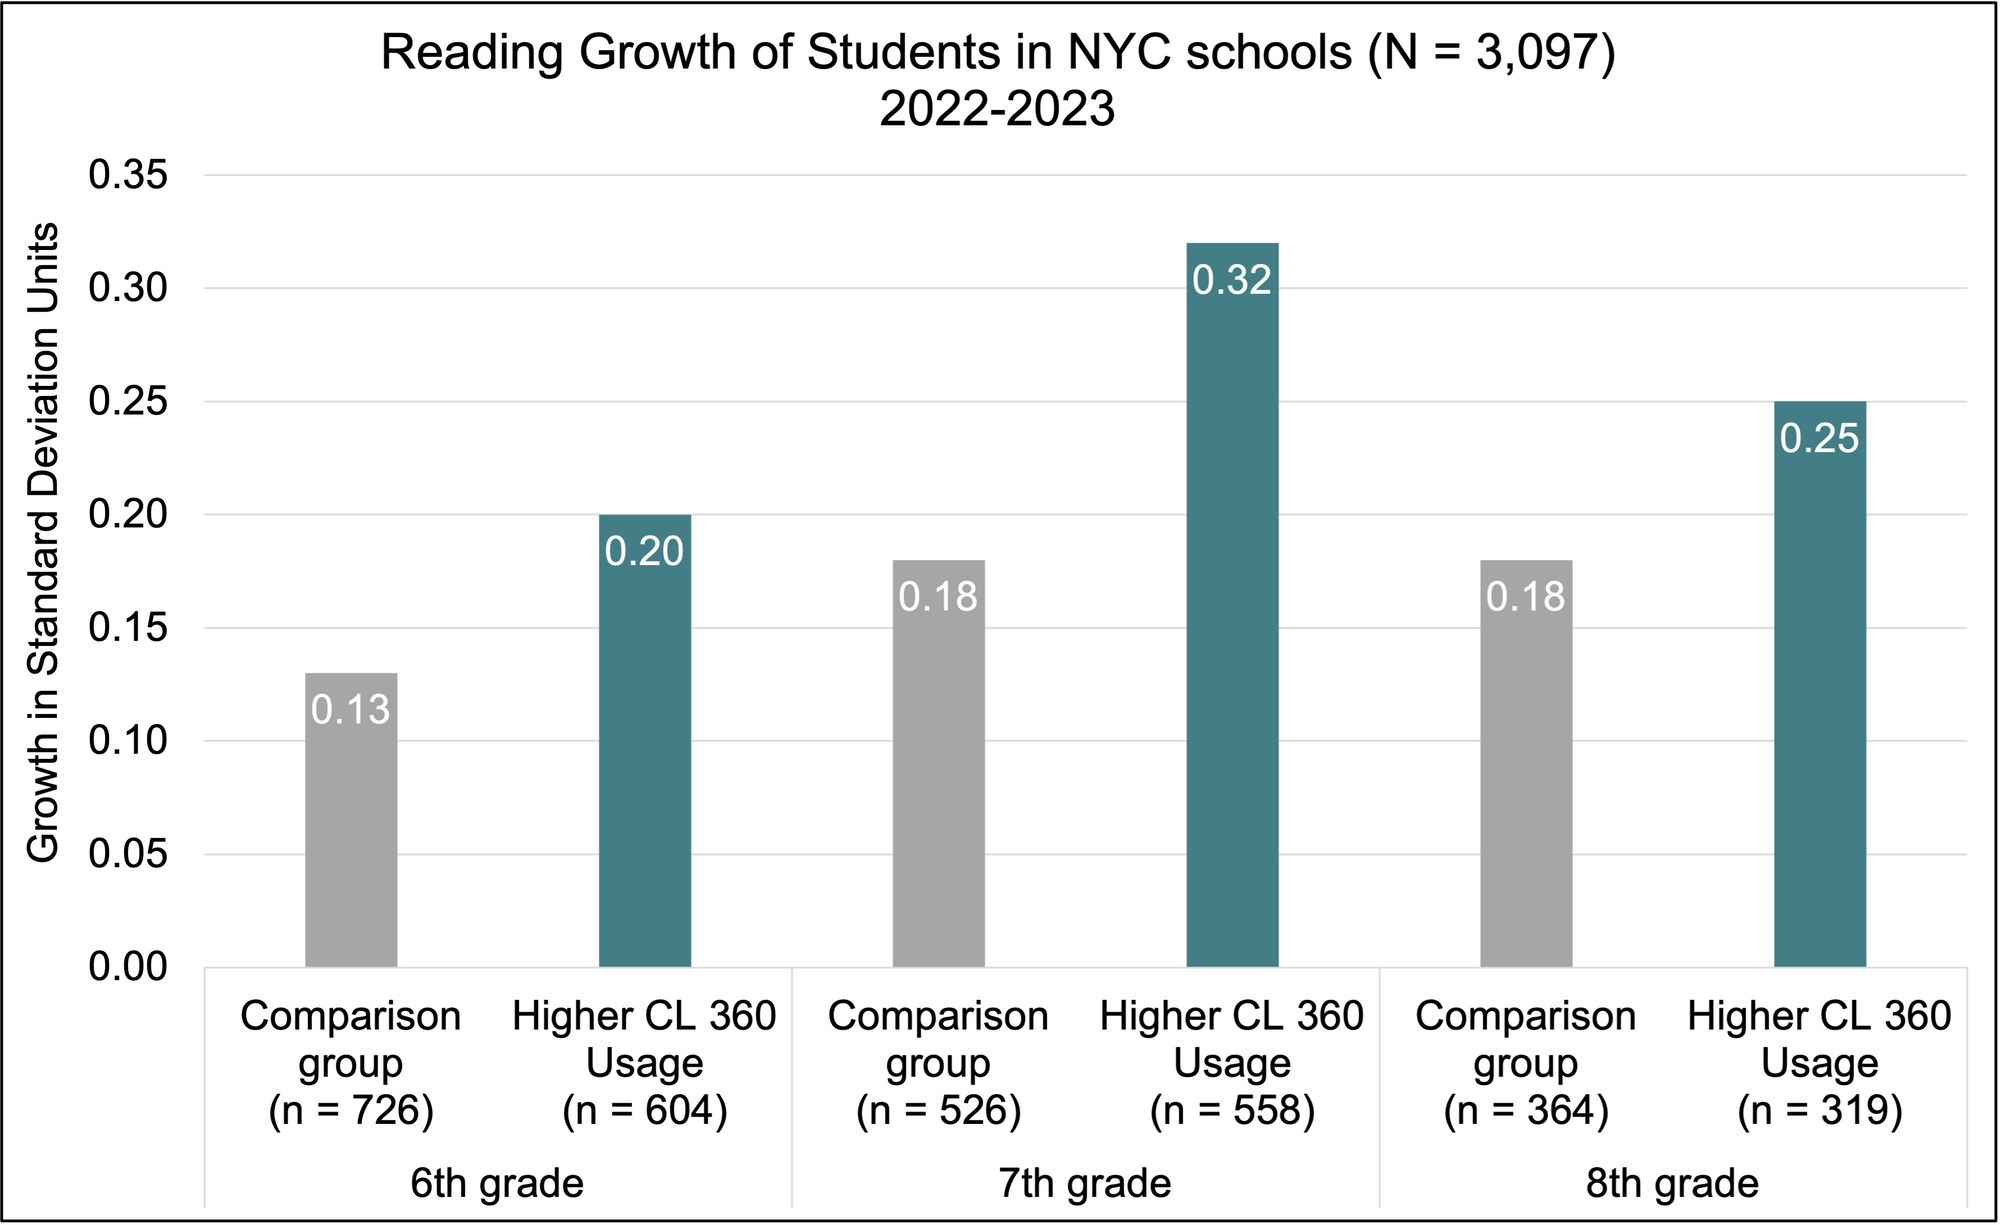 Bar chart showing student reading growth for grades 6-8